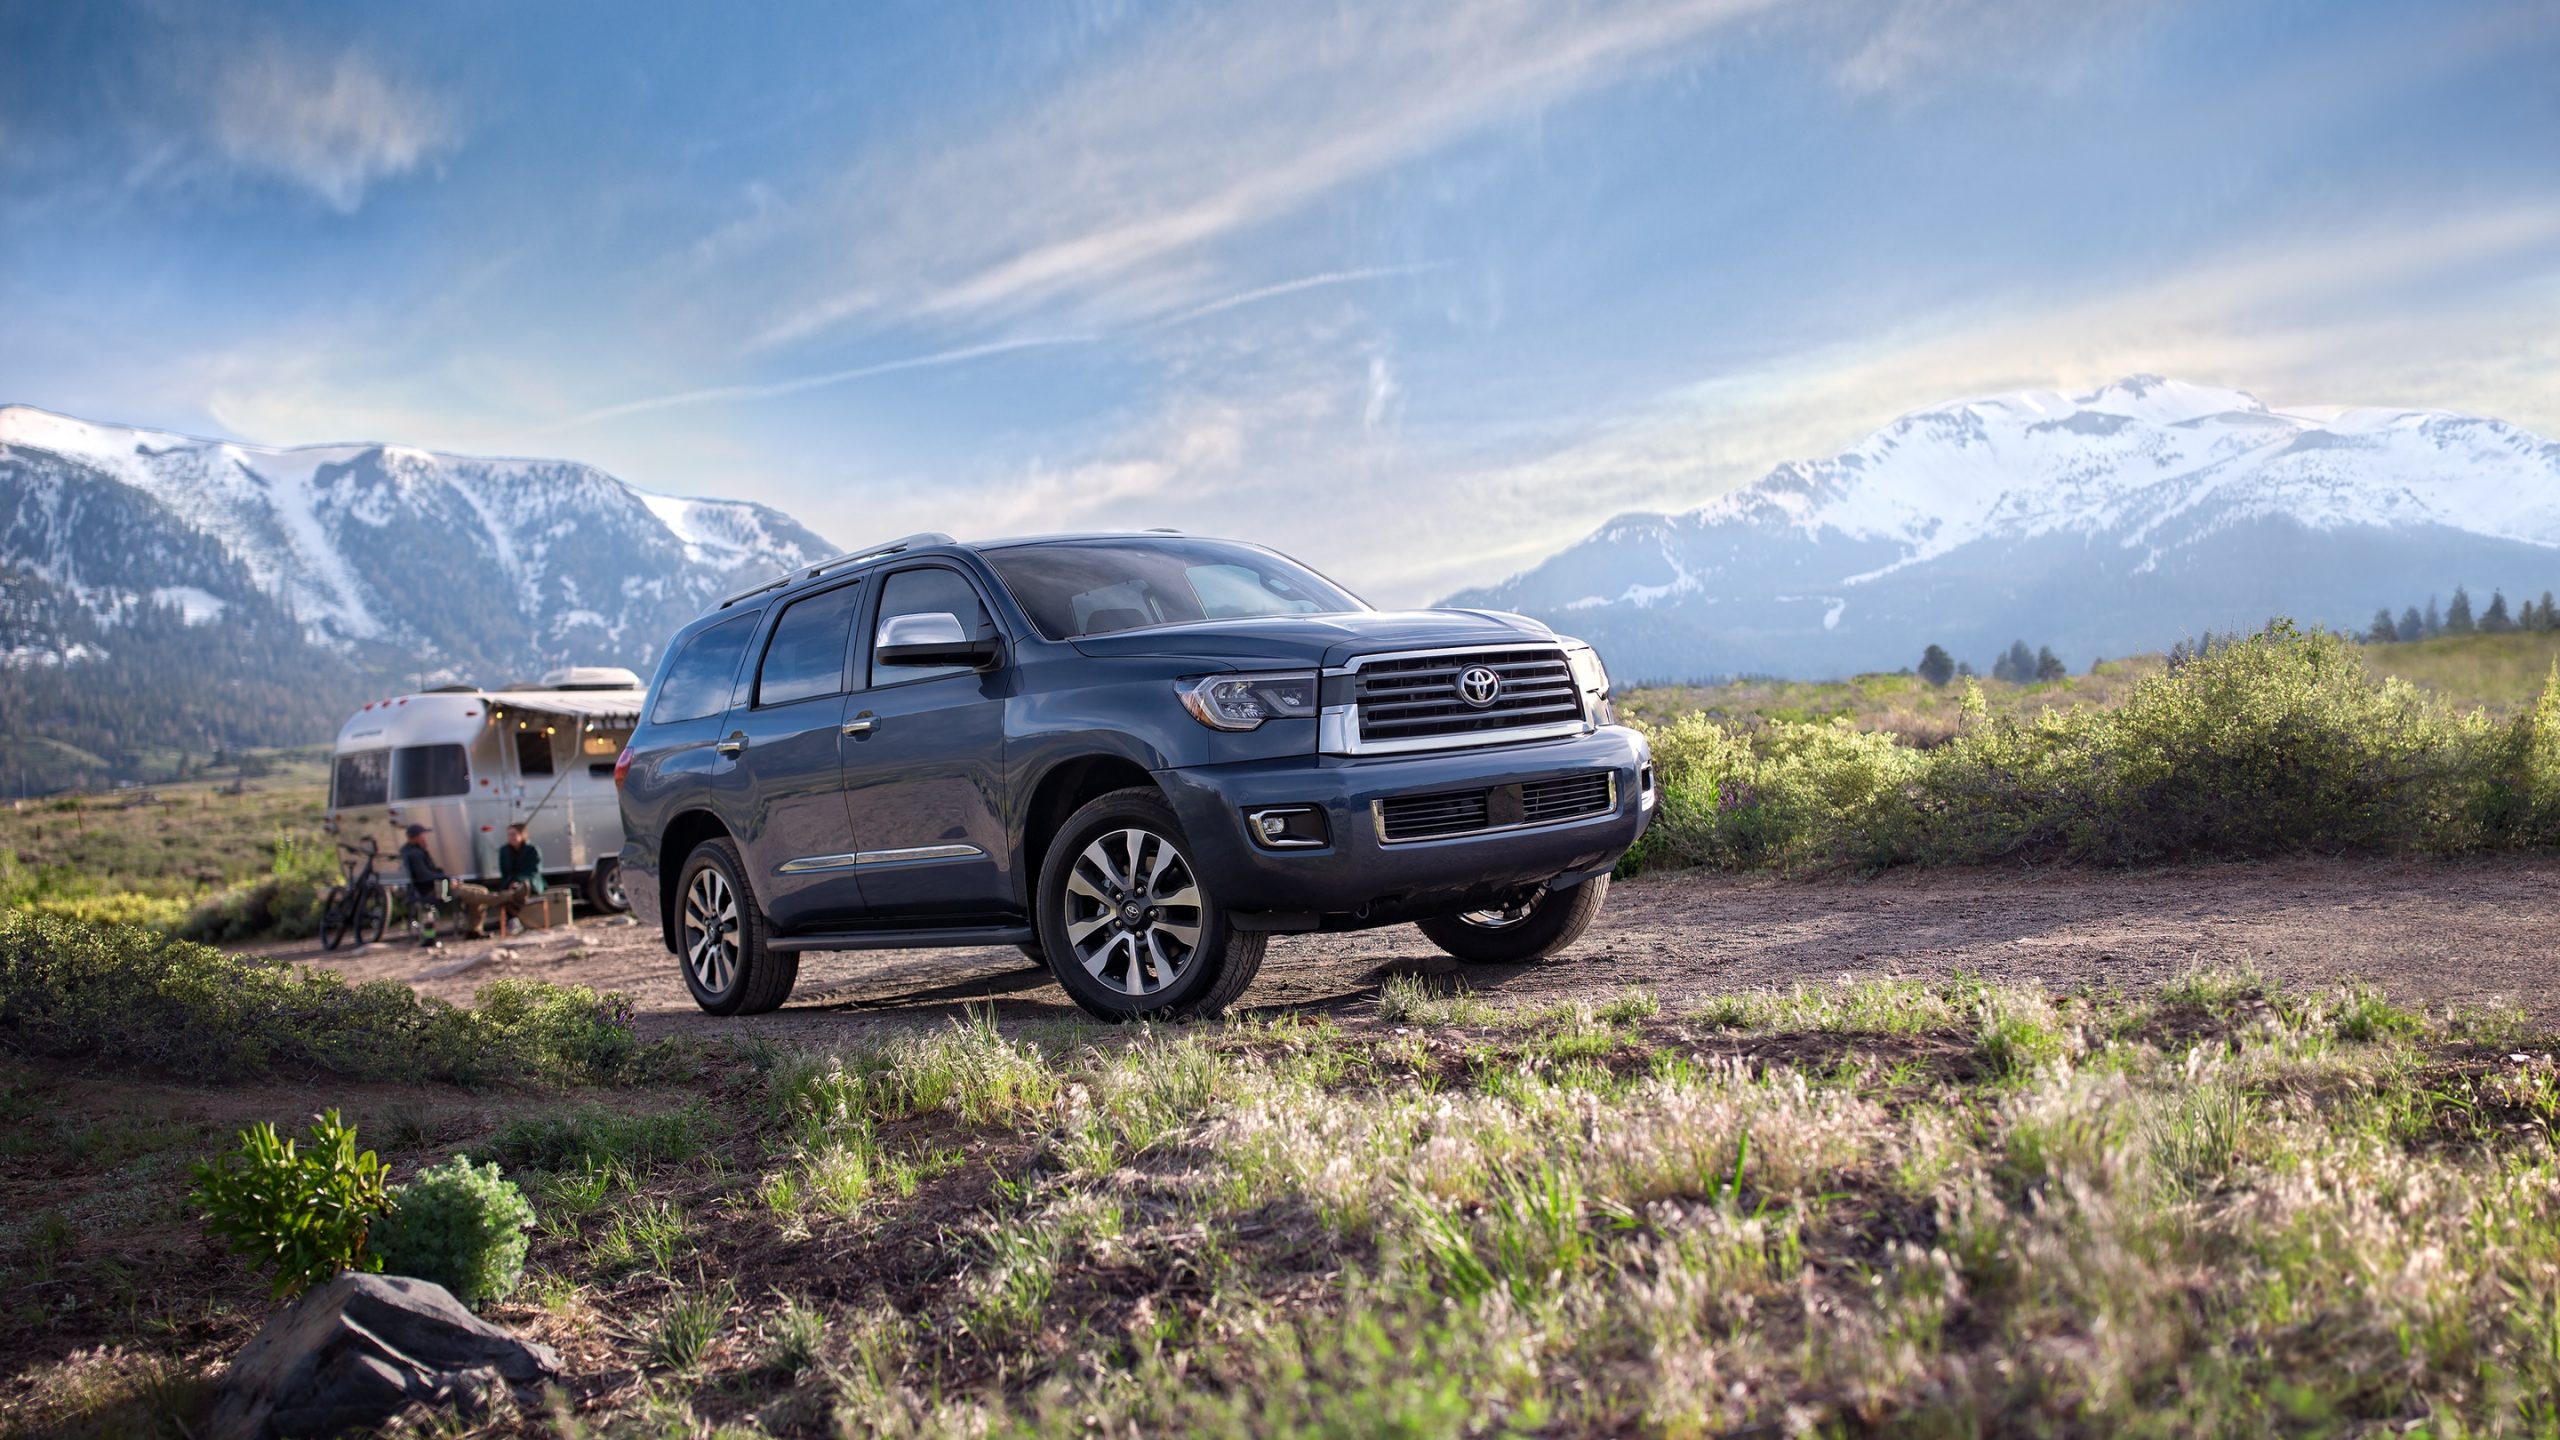 The 2021 Toyota Sequoia on a camping trip